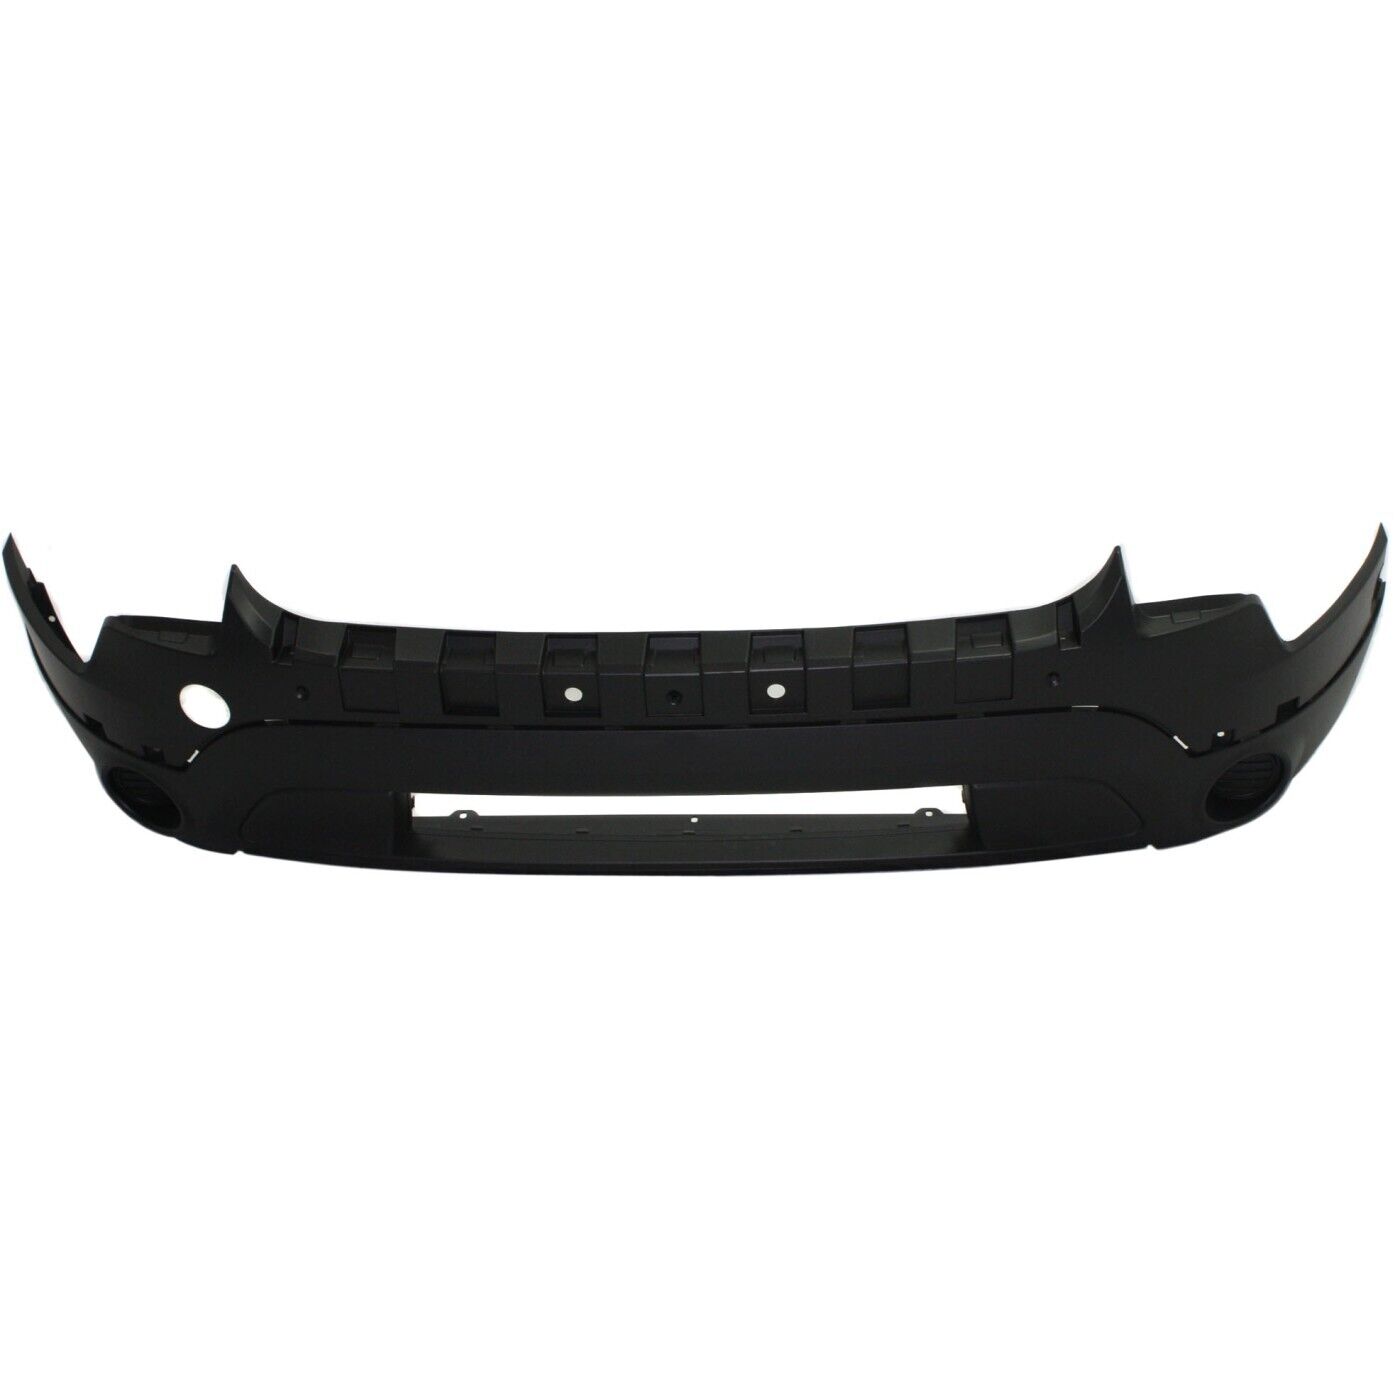 Front Lower Bumper Cover For 2011-15 Ford Explorer Textured Black